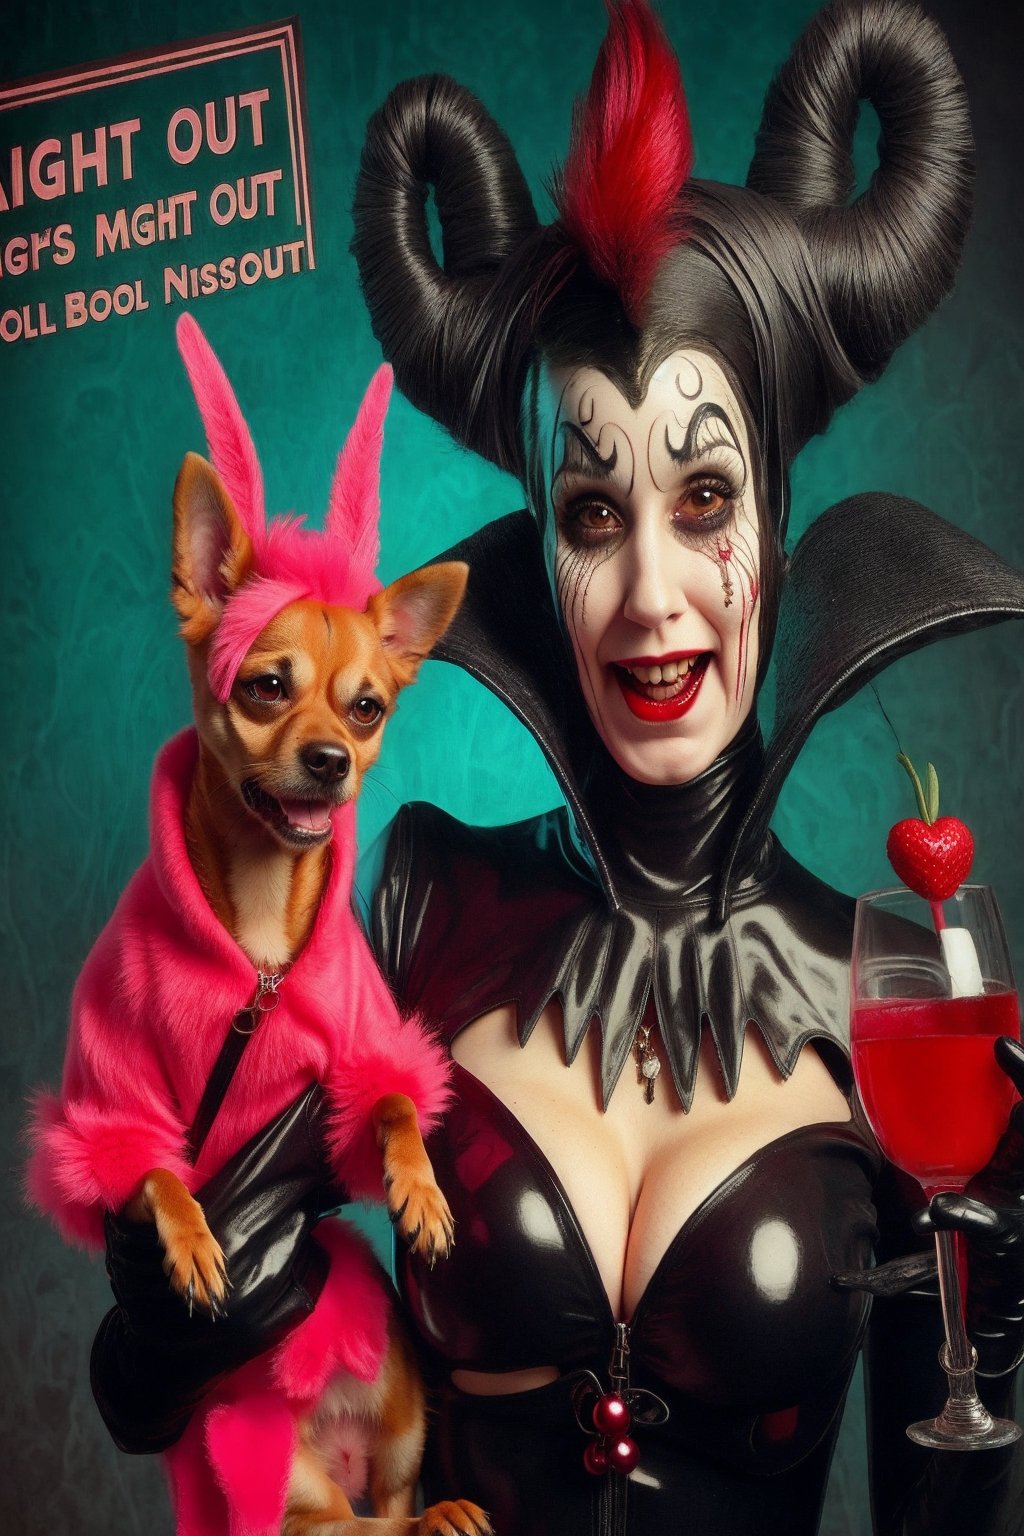 madam goobash and and her demonic chihuahua wearing the latest and greates of fashion in wholebodyrubbersuit girls night out 1800´s vintage add